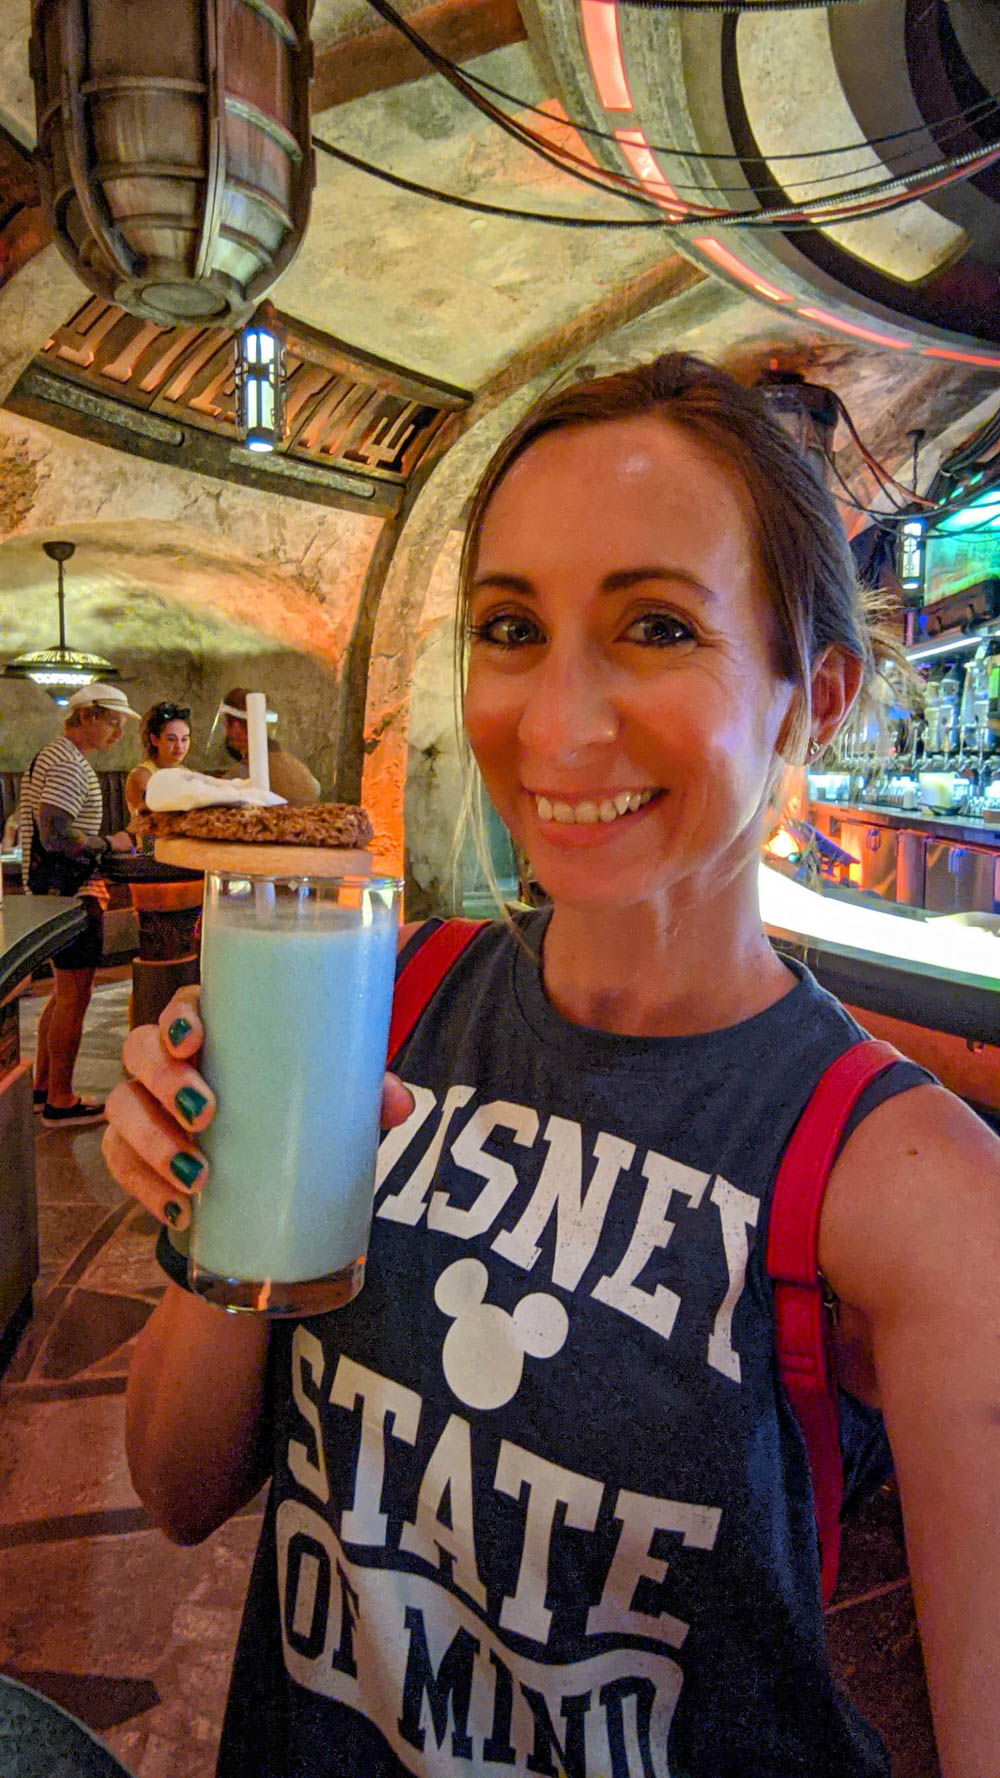 Visiting Disney World During the Pandemic: Everything You’re Dying to Know | Disney World in 2020, what it's like to visit disney world right now. | drinking blue milk at Oga's Cantina in Star Wars: Galaxy's Edge at Hollywood Studios